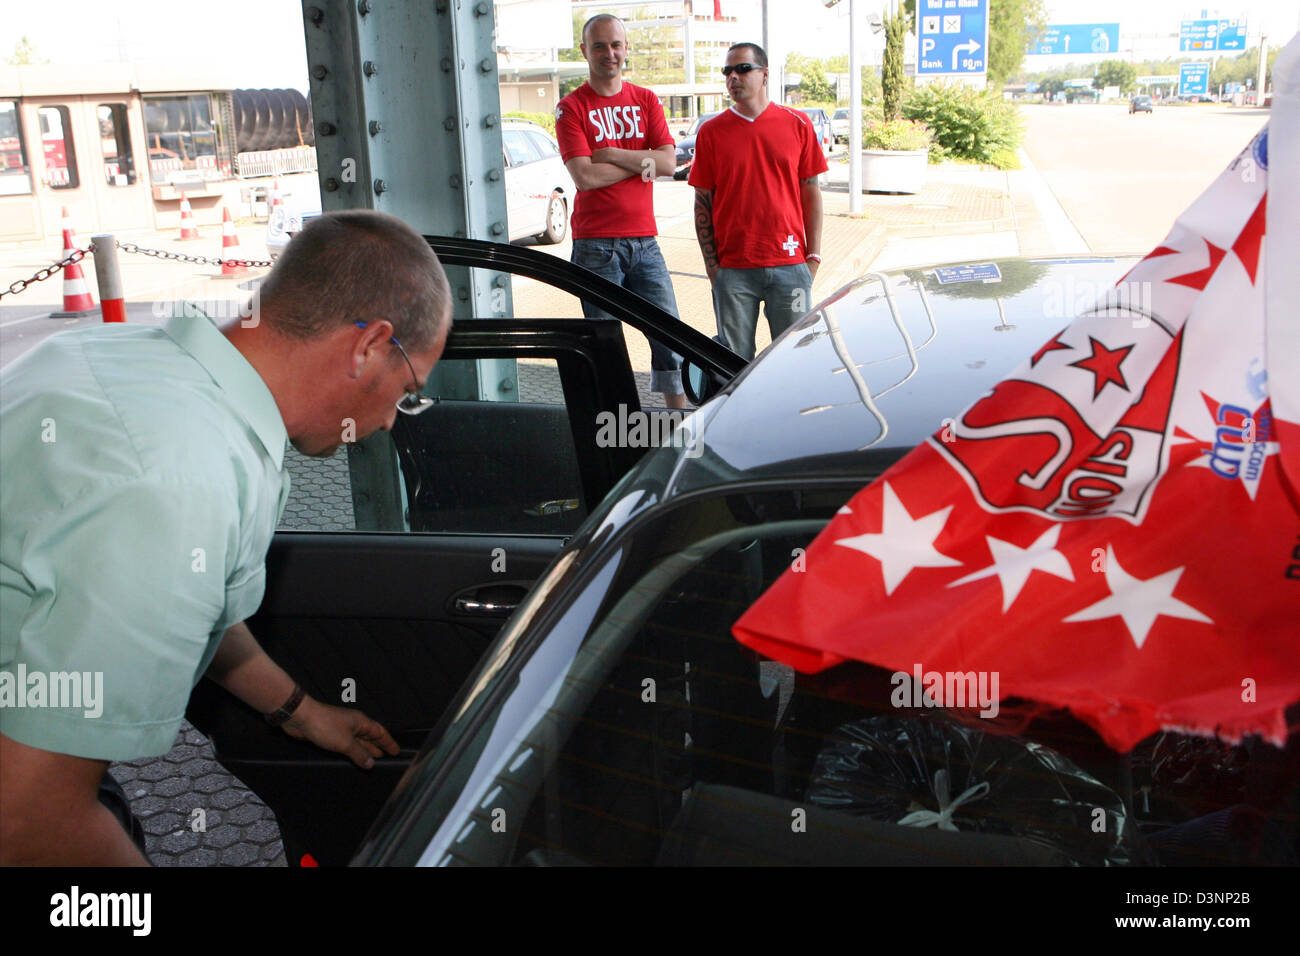 A German border control officer checks the car of Swiss soccer fans at the German-Swiss border control station Basel-Weil am Rhein, Germany, Tuesday, 13 June 2006. Police and border control intesified the controls at the borders of Switzerland and France due to the FIFA World Cup Group G match France vs Switzerland today in Stuttgart, Germany. Photo: Rolf Haid Stock Photo